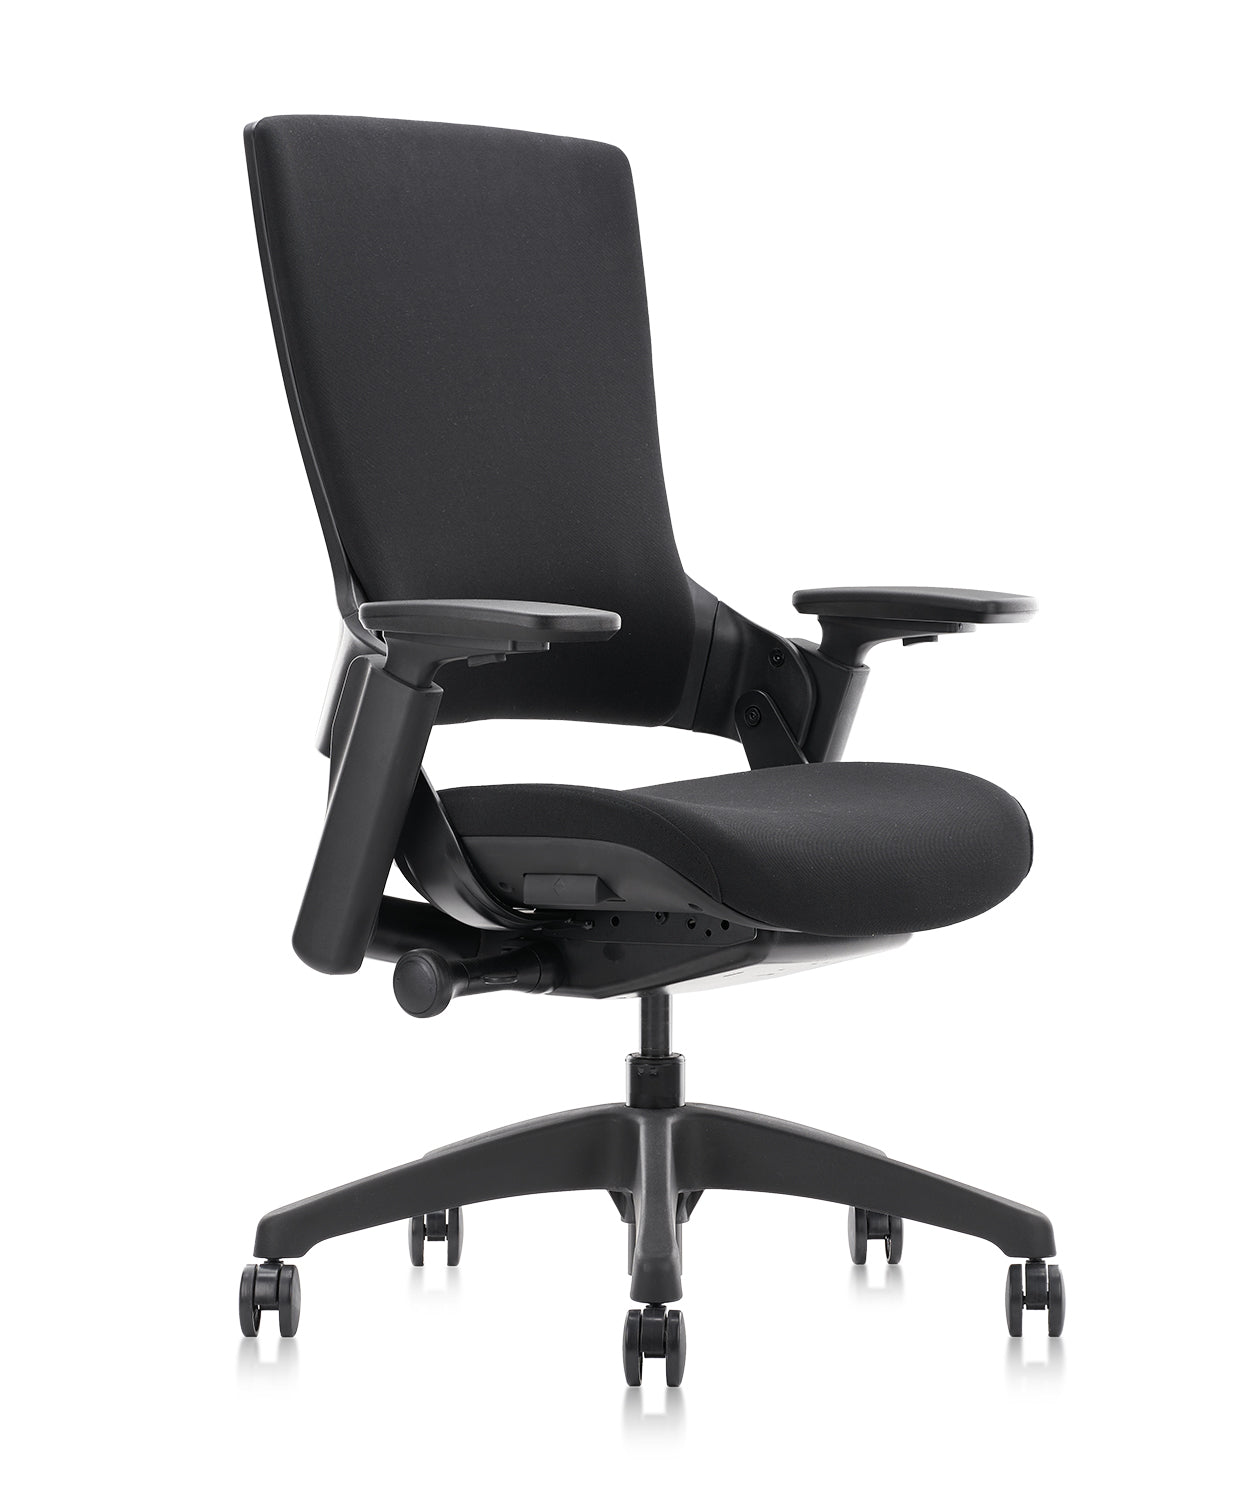 CLATINA Ergonomic High Swivel Executive Chair with Adjustable Height 3D Arm Rest Lumbar Support and Upholstered Back for Home Office Black New Version